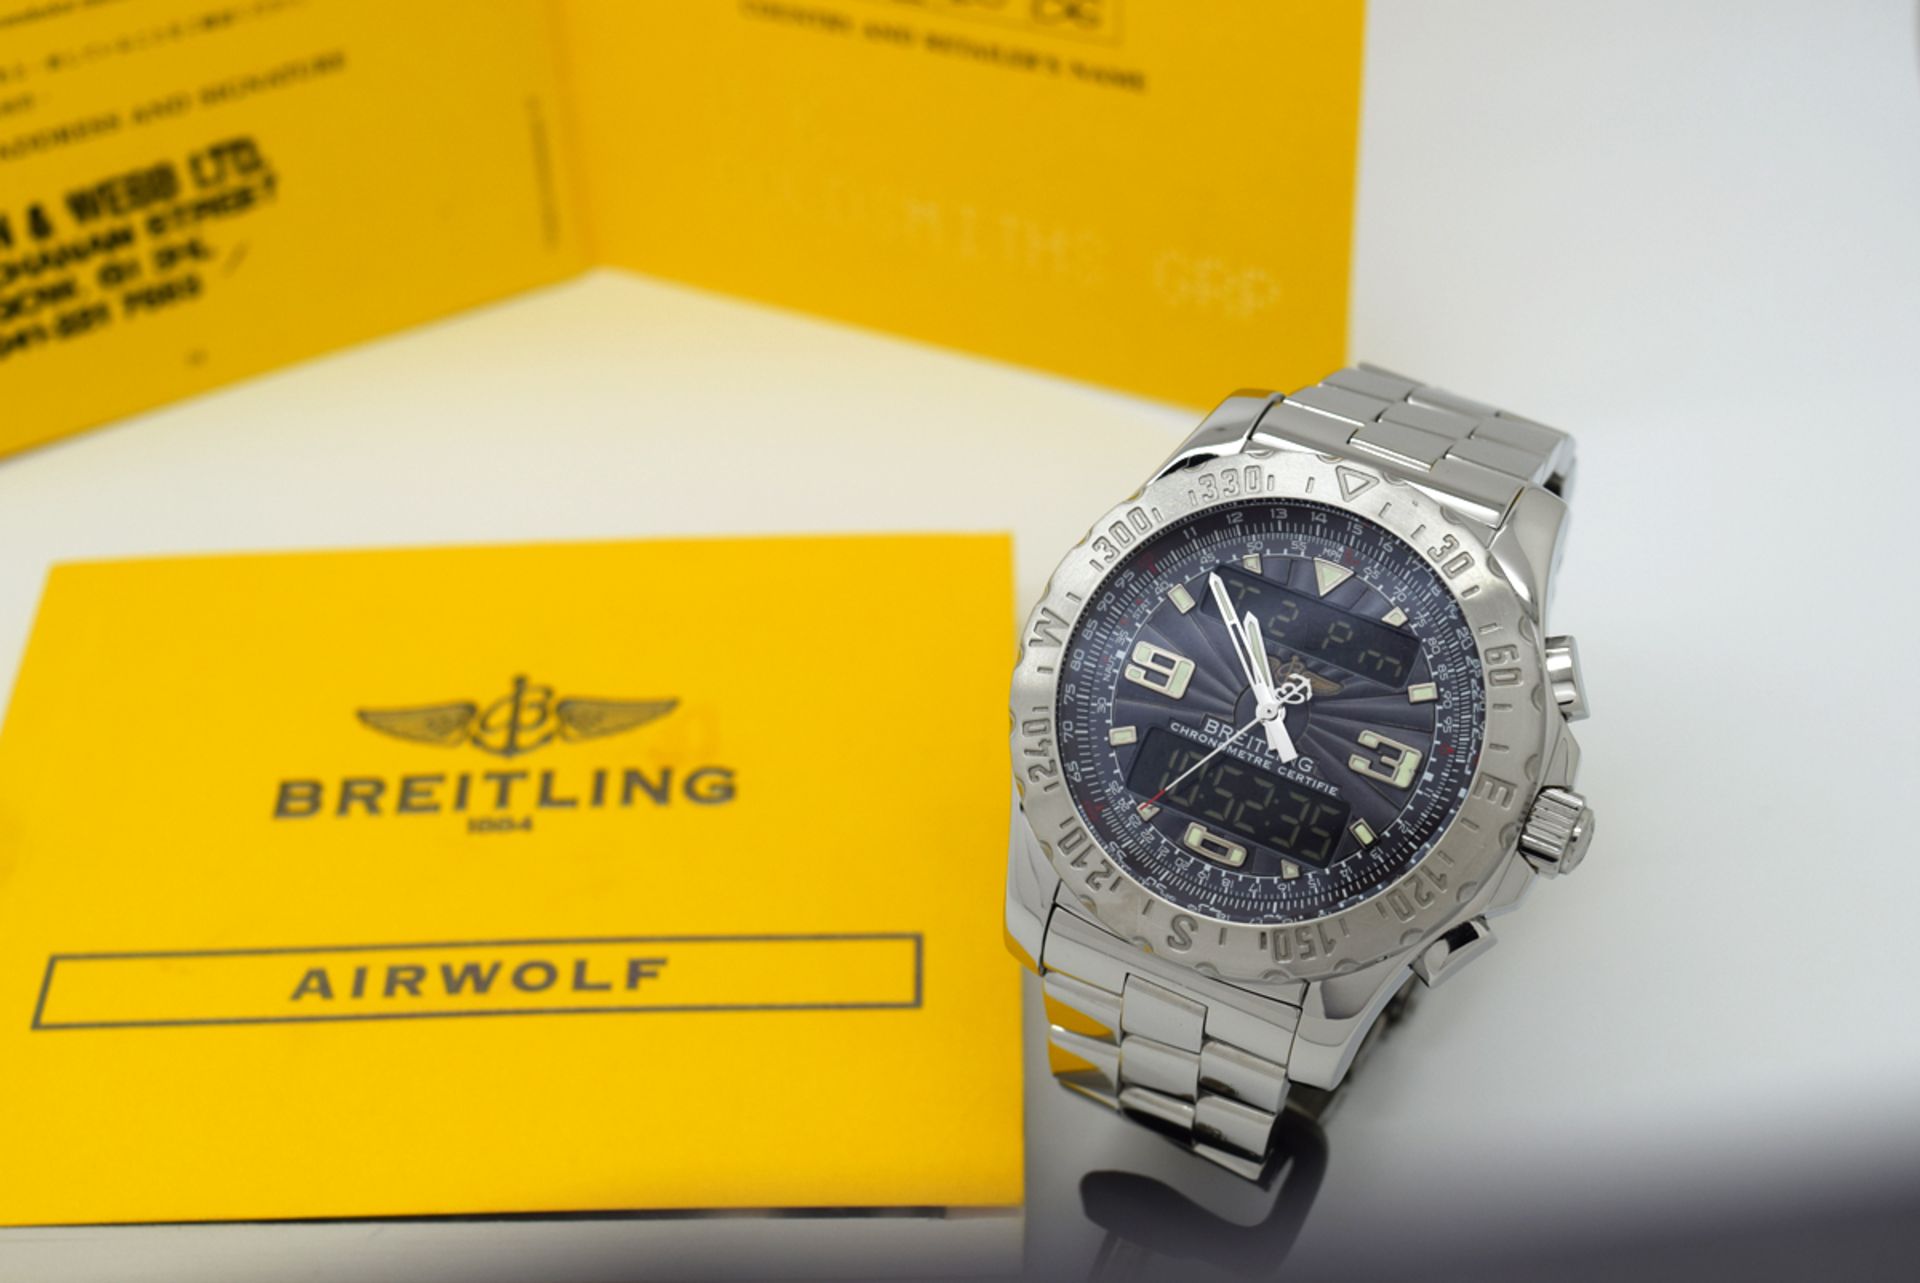 BREITLING AIRWOLF 'PROFESSIONAL' (A78363) - SLATE BLUE DIAL - Image 8 of 9